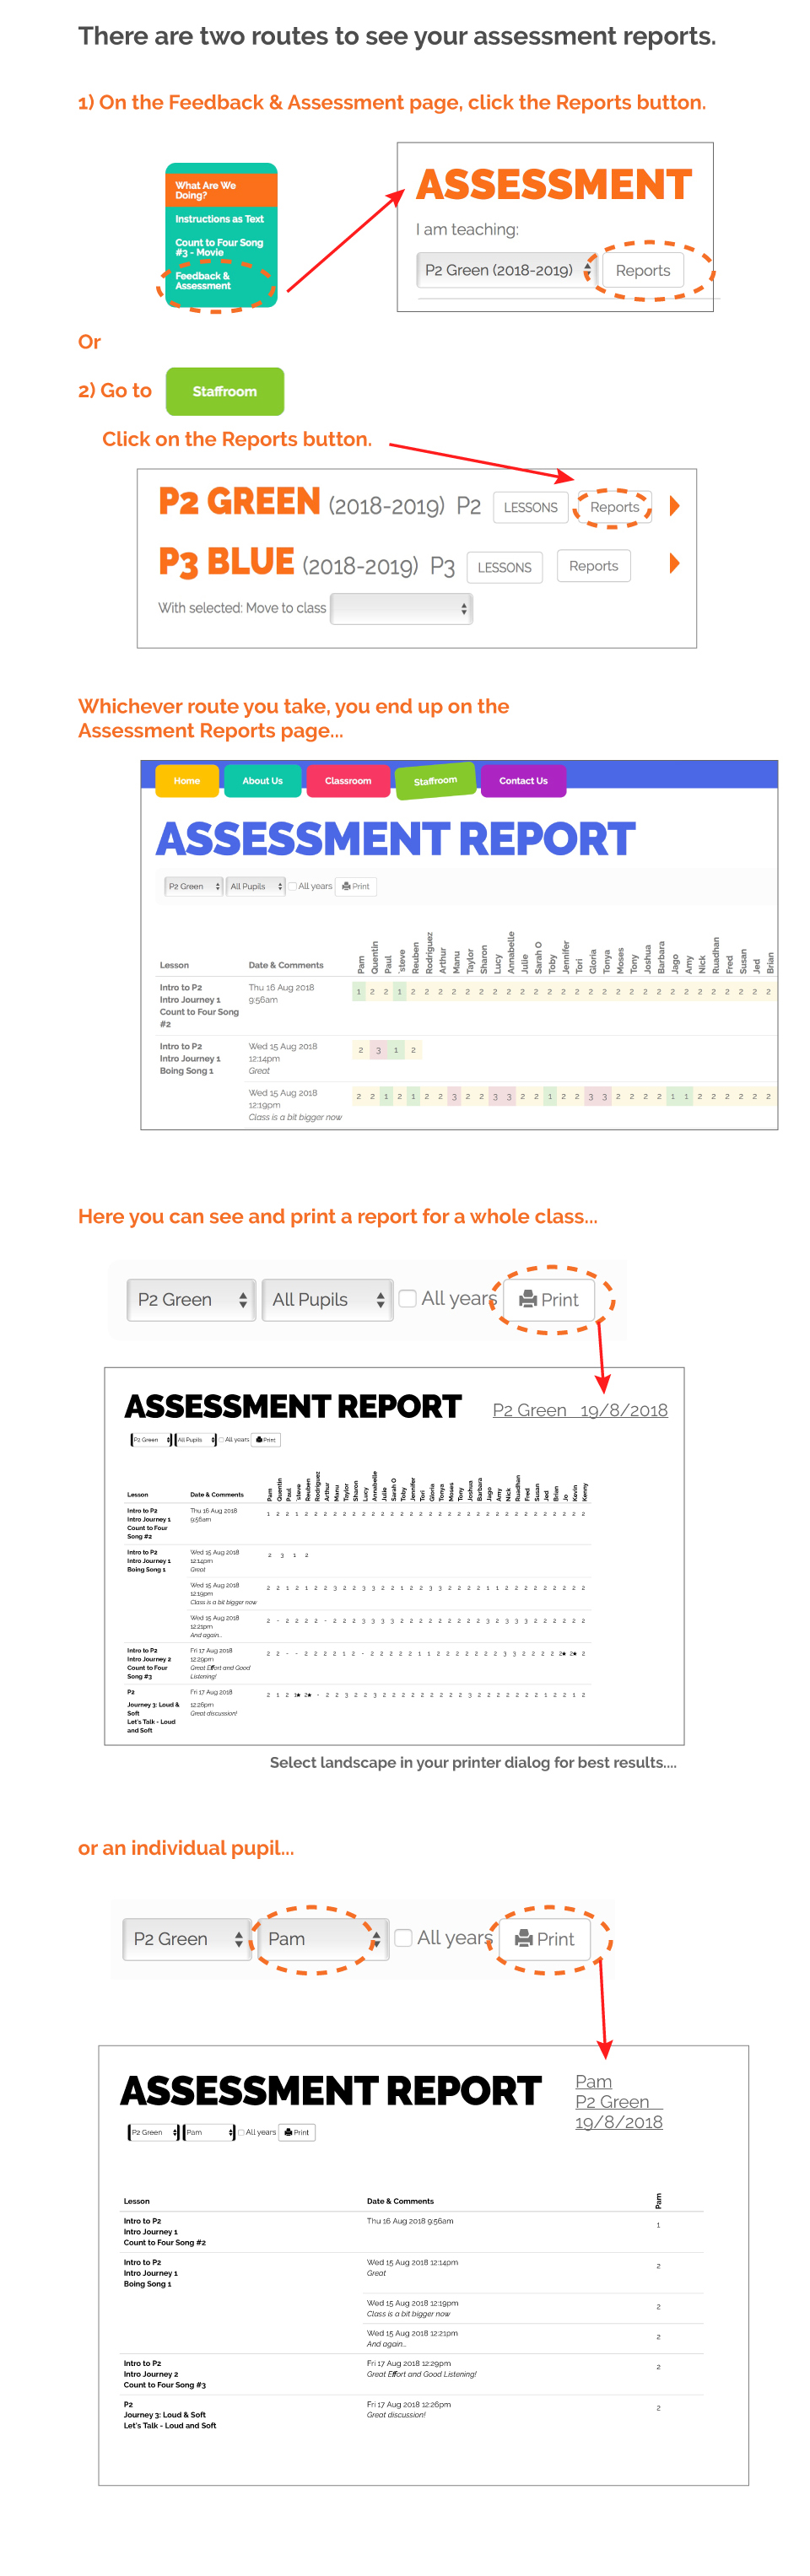 Graphic showing where and how to see and print reports